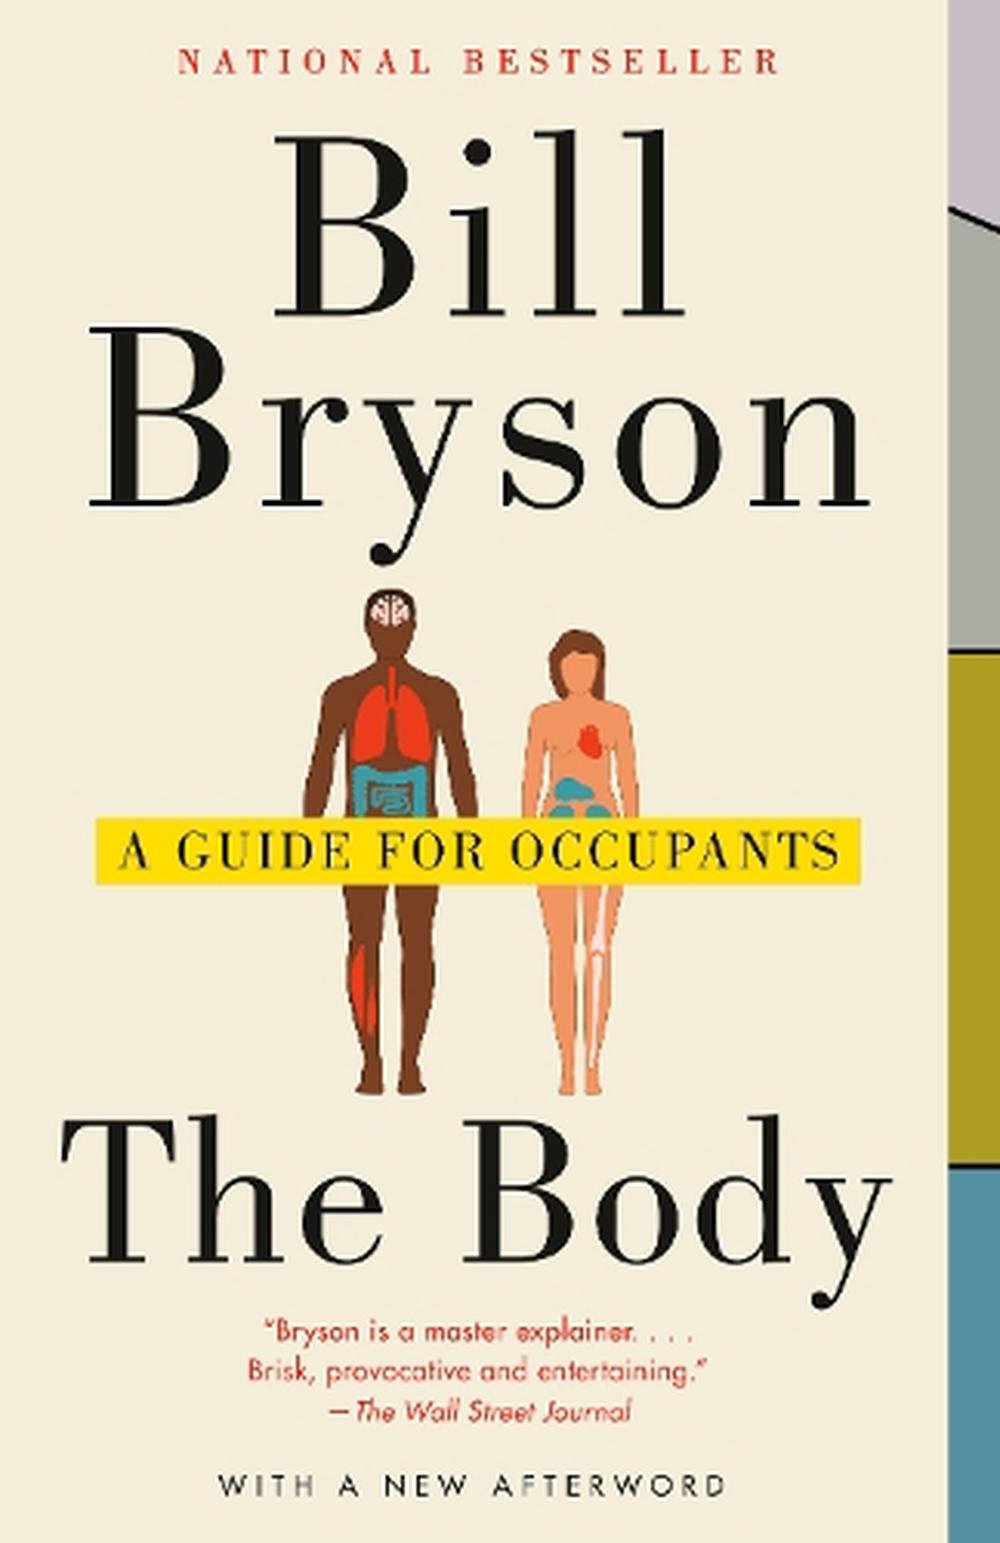 the body a guide for occupants by bill bryson